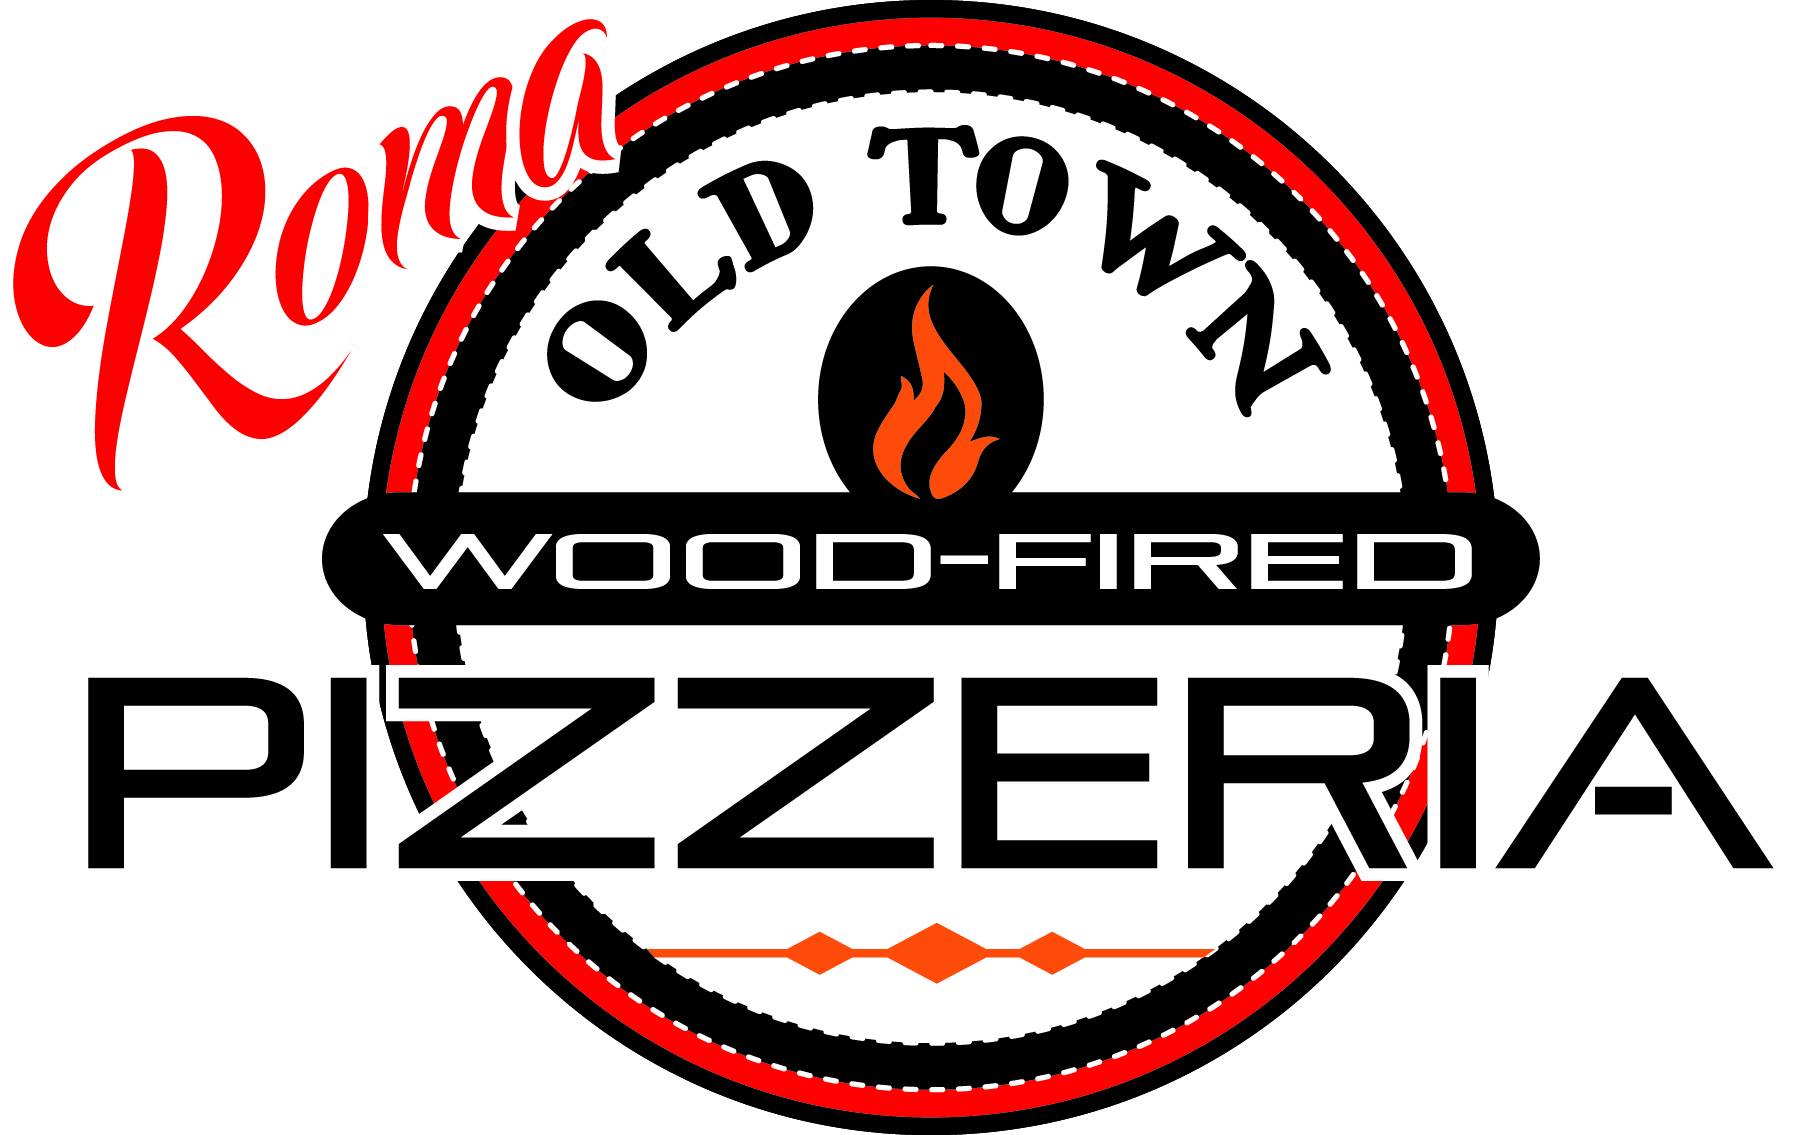 Roma Old Town Wood-Fired Pizzeria Logo